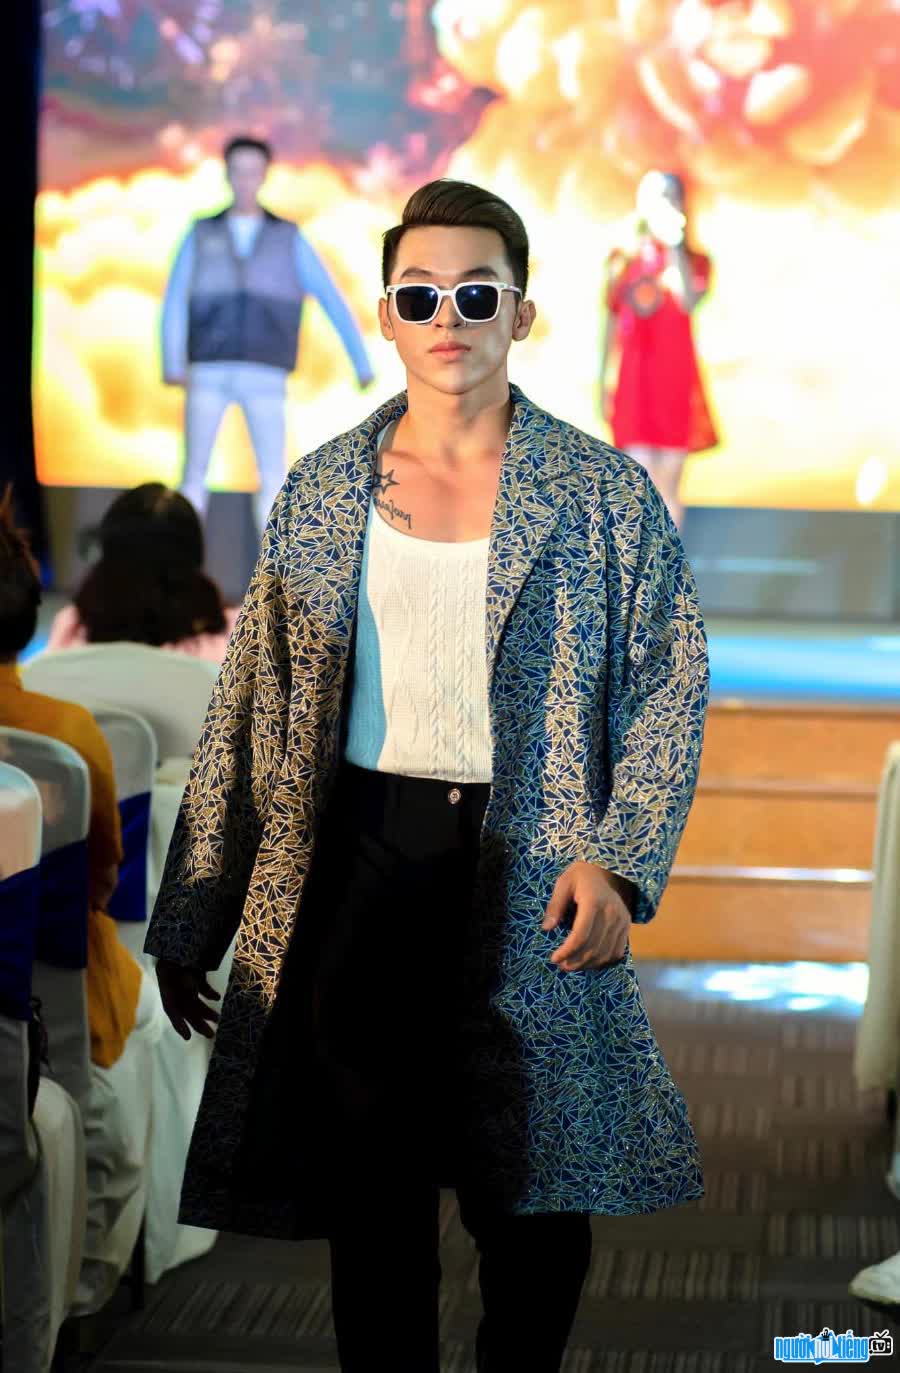 Picture of singer Hoang Tahi at an entertainment industry event